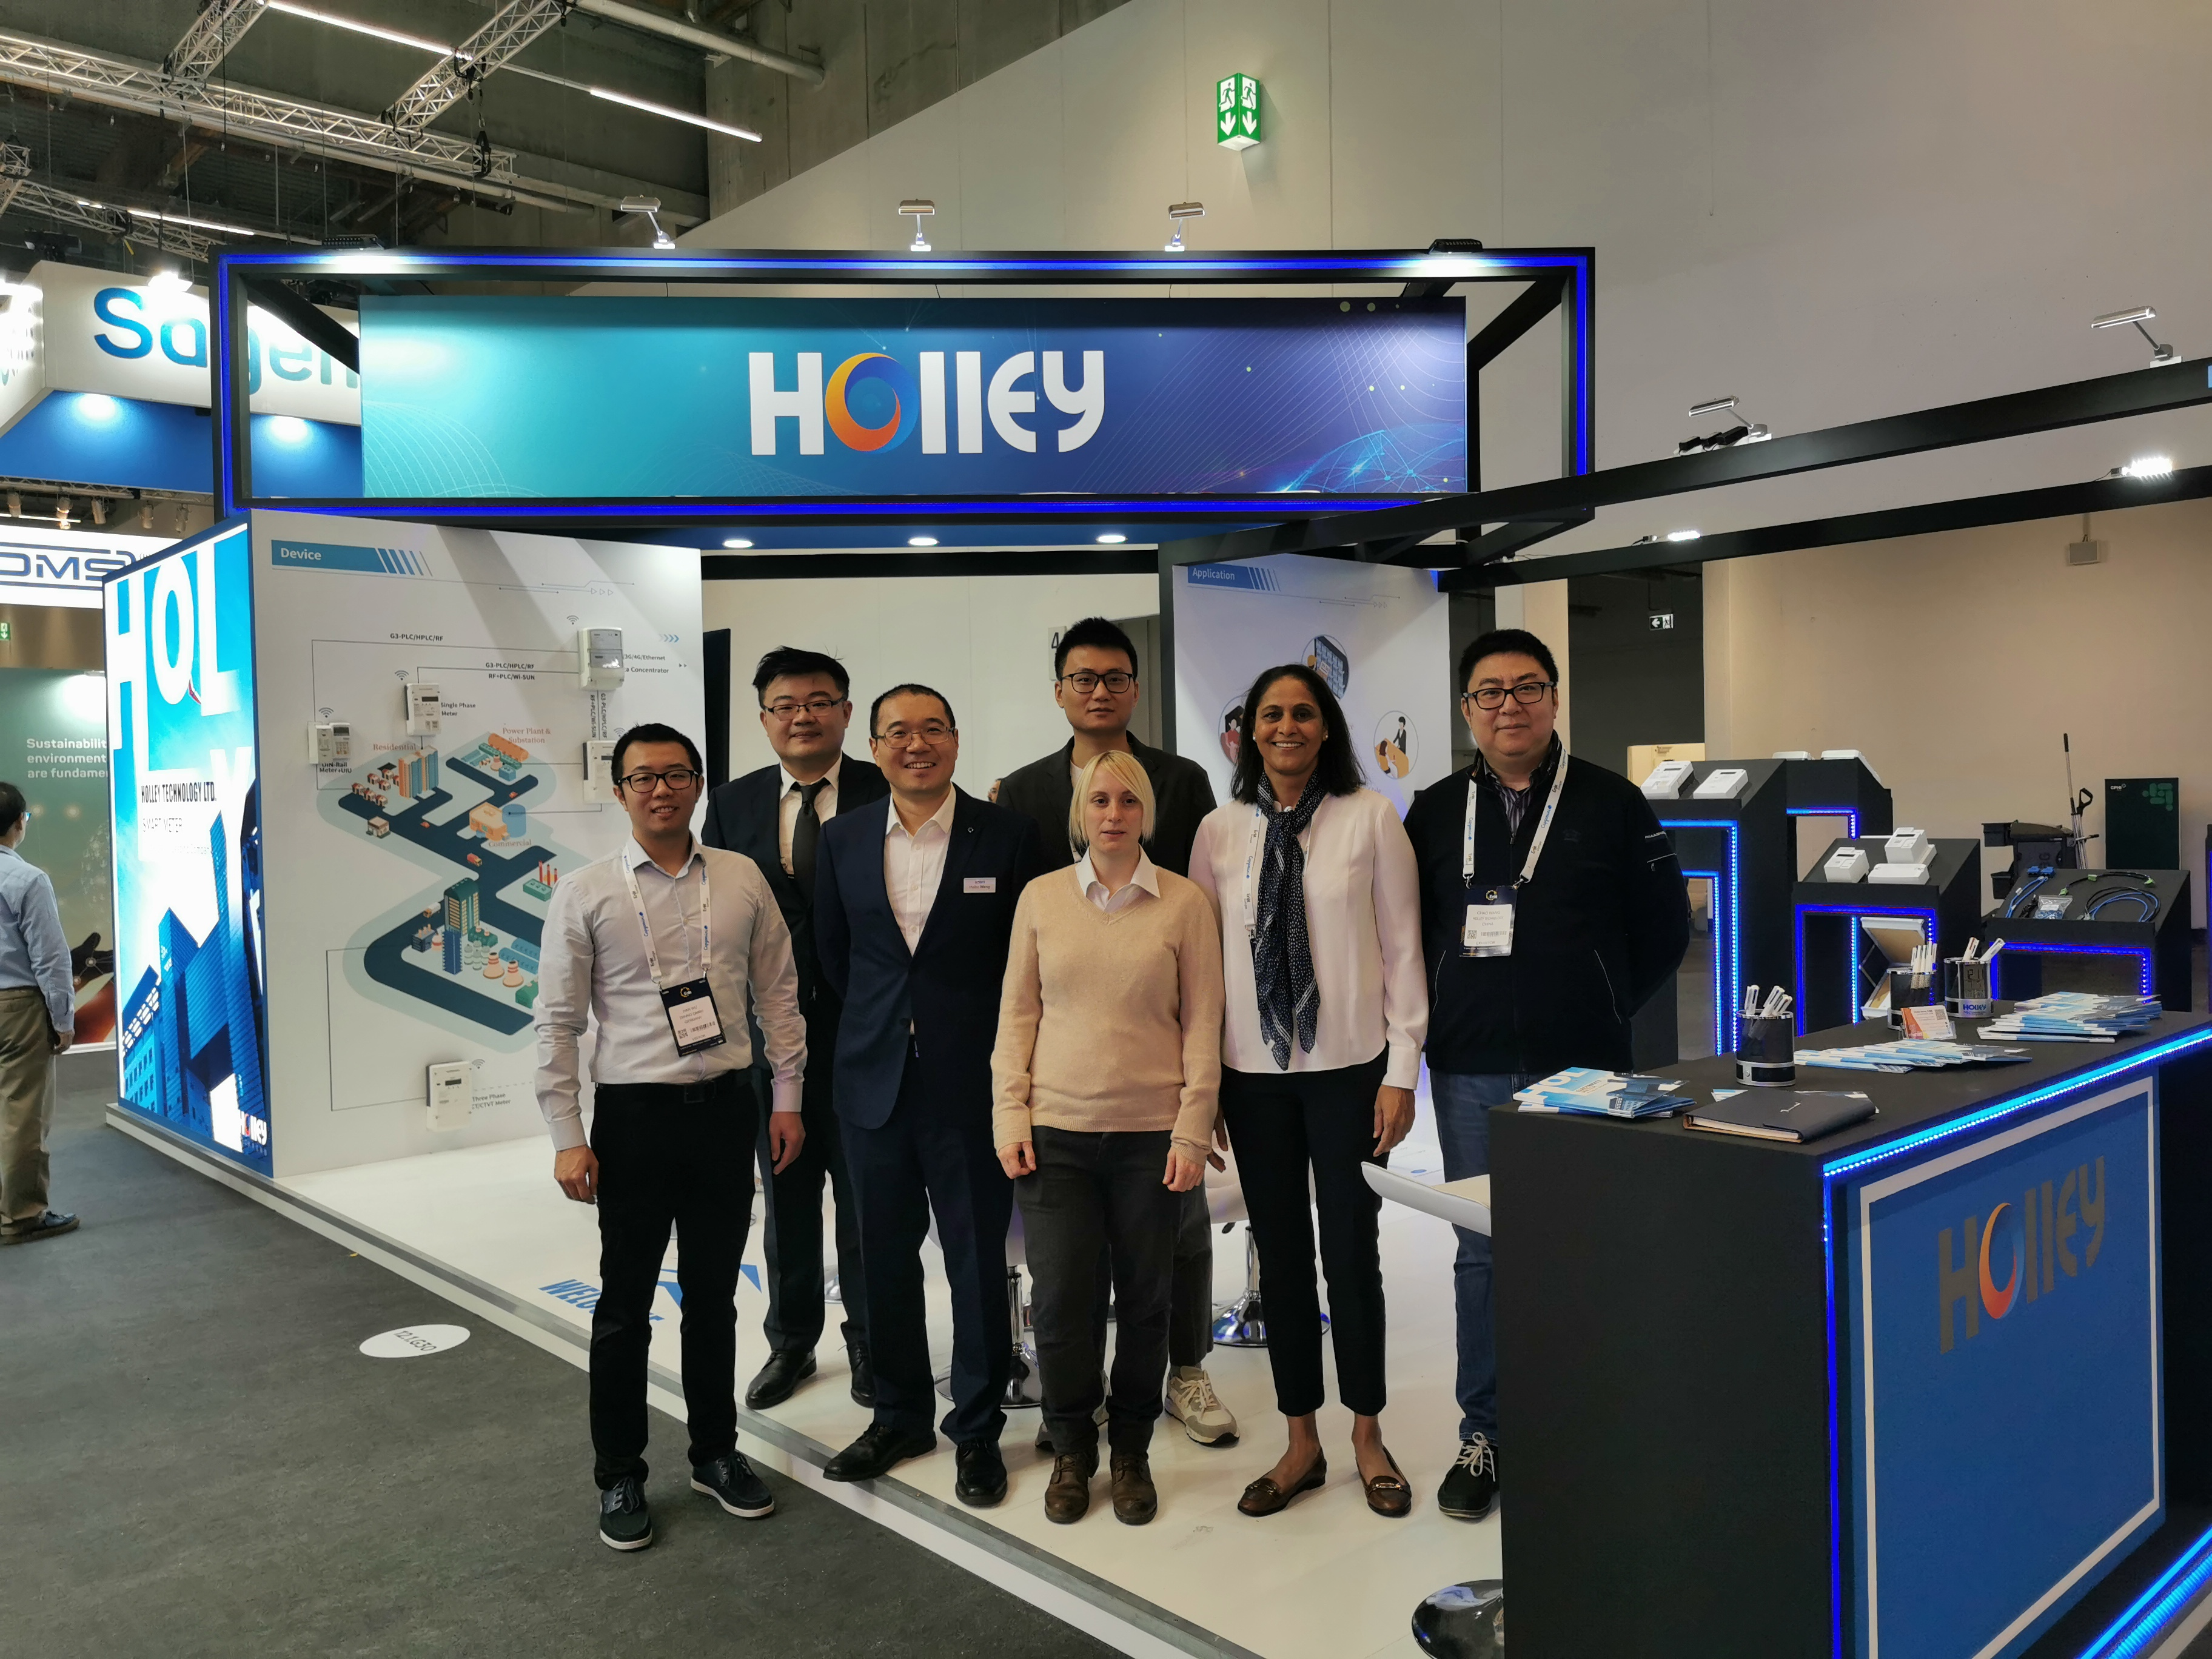 Holley Technology Ltd. has successfully attended the European Energy and Power Exhibition 2022